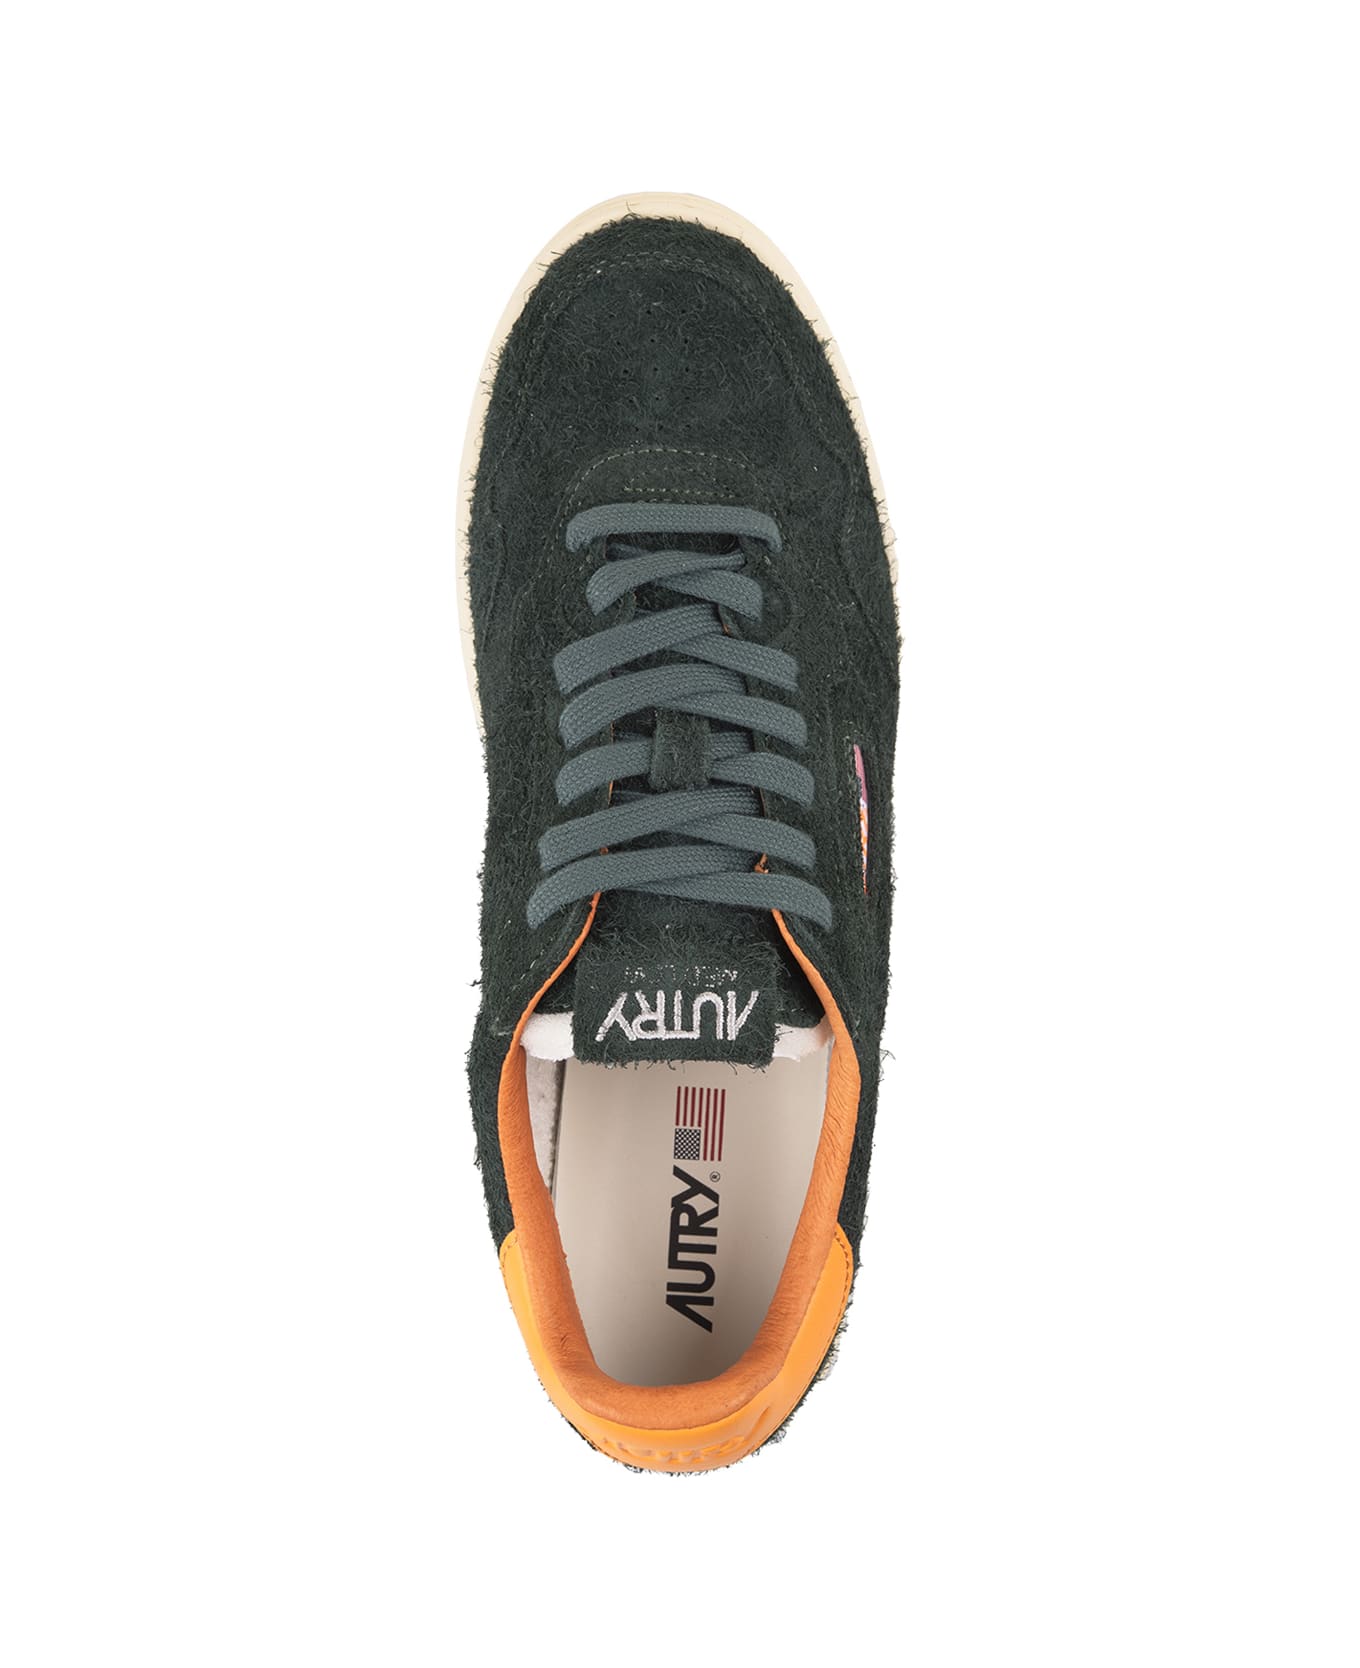 Autry Medalist Flat Sneakers In Green And Glory Suede - Green